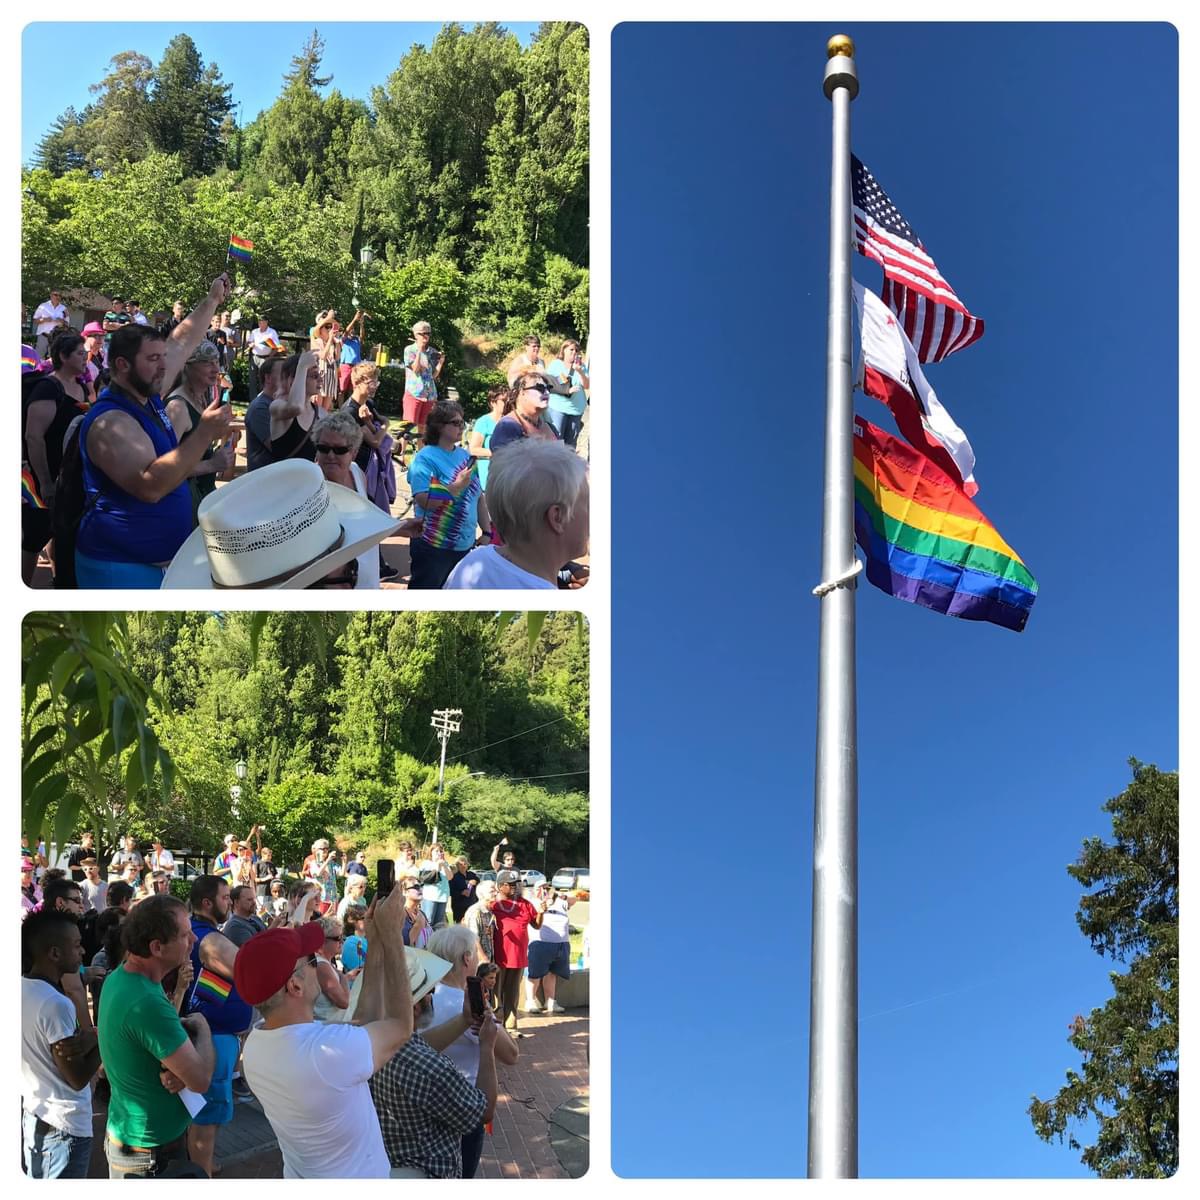 images of crowds celebrating and a flagpole with the American Flag, California Flag, and Pride Flag raised.